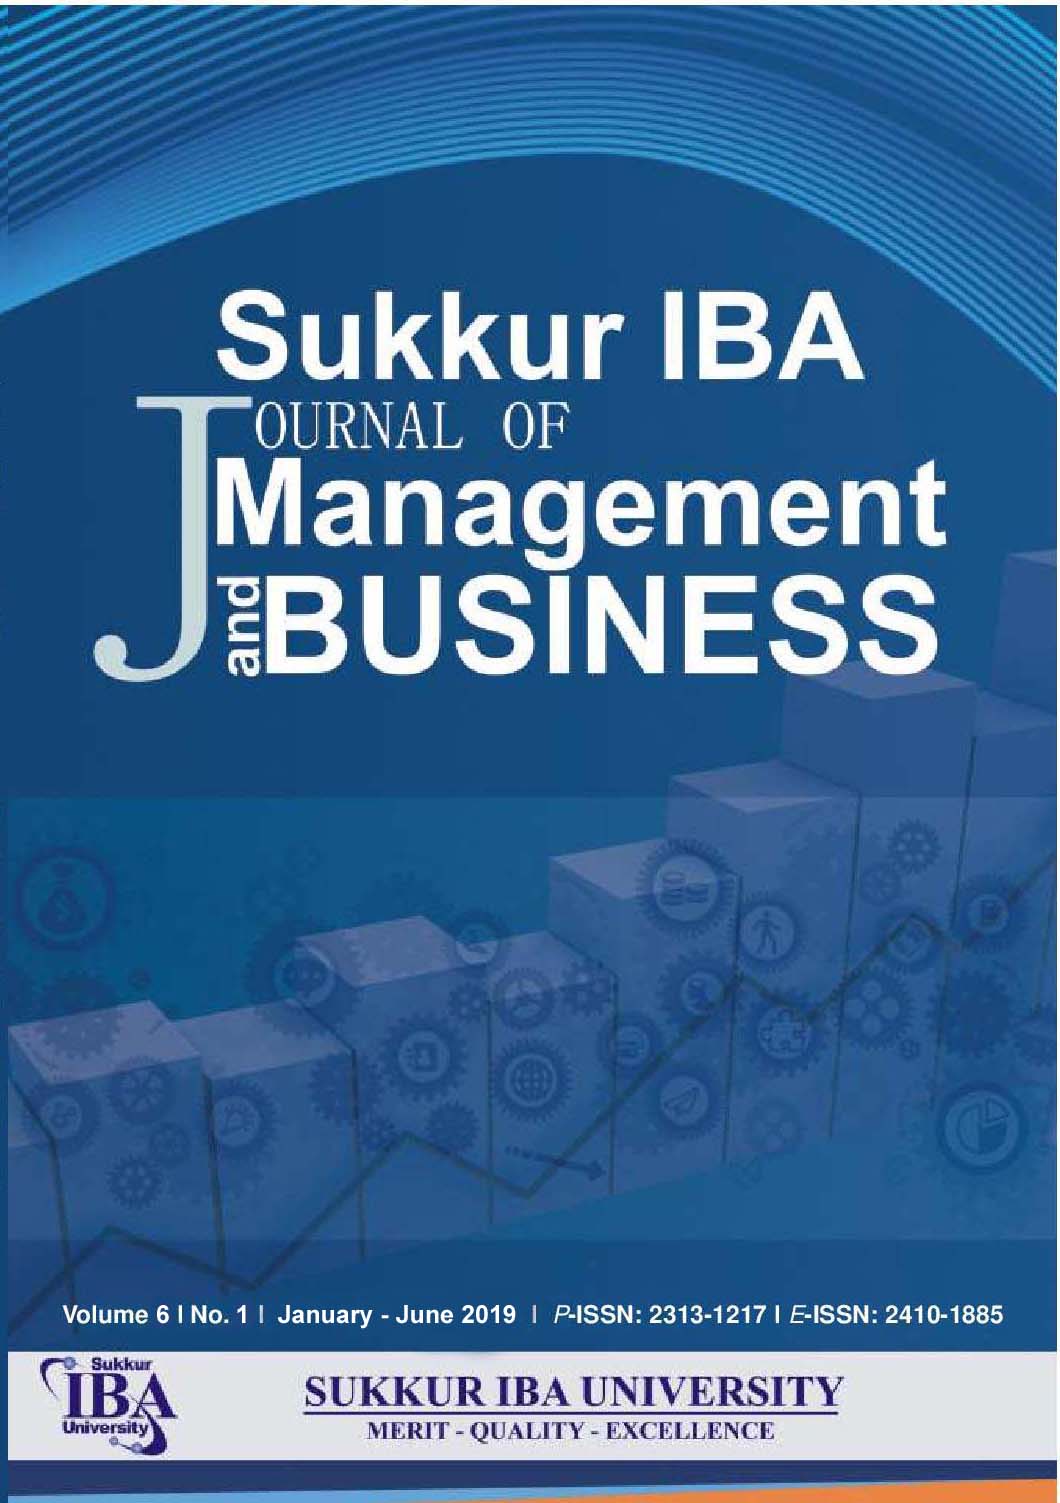 					View Vol. 6 No. 1 (2019): Sukkur IBA Journal of Management and Business
				